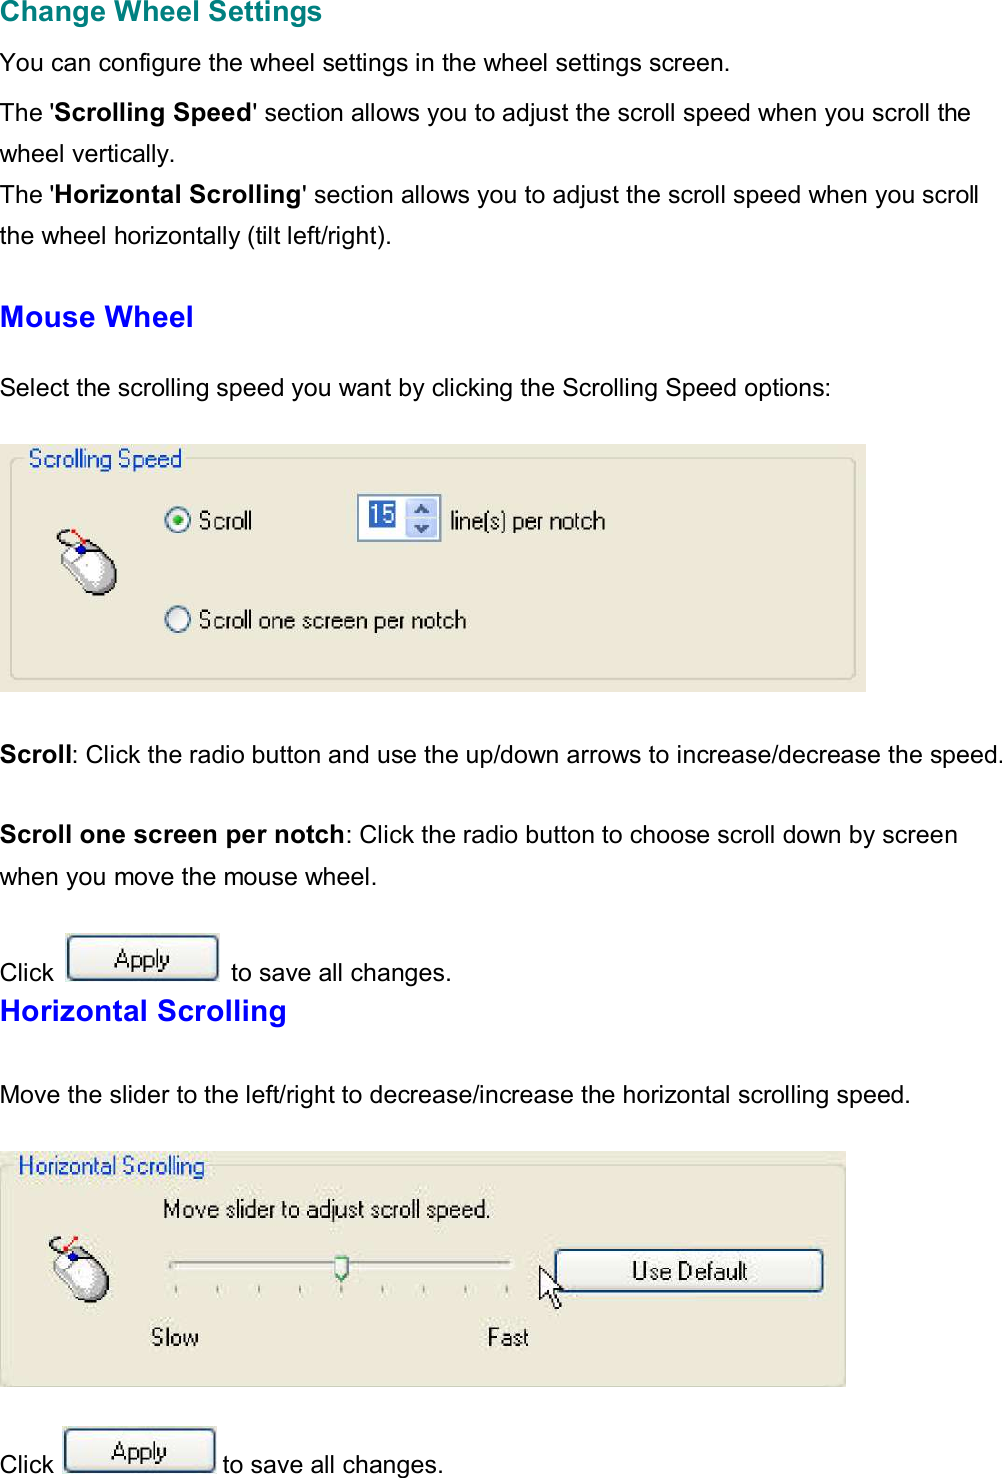  Change Wheel Settings  You can configure the wheel settings in the wheel settings screen.  The &apos;Scrolling Speed&apos; section allows you to adjust the scroll speed when you scroll the wheel vertically. The &apos;Horizontal Scrolling&apos; section allows you to adjust the scroll speed when you scroll  the wheel horizontally (tilt left/right).  Mouse Wheel   Select the scrolling speed you want by clicking the Scrolling Speed options:      Scroll: Click the radio button and use the up/down arrows to increase/decrease the speed.   Scroll one screen per notch: Click the radio button to choose scroll down by screen when you move the mouse wheel.  Click   to save all changes. Horizontal Scrolling   Move the slider to the left/right to decrease/increase the horizontal scrolling speed.       Click  to save all changes.   